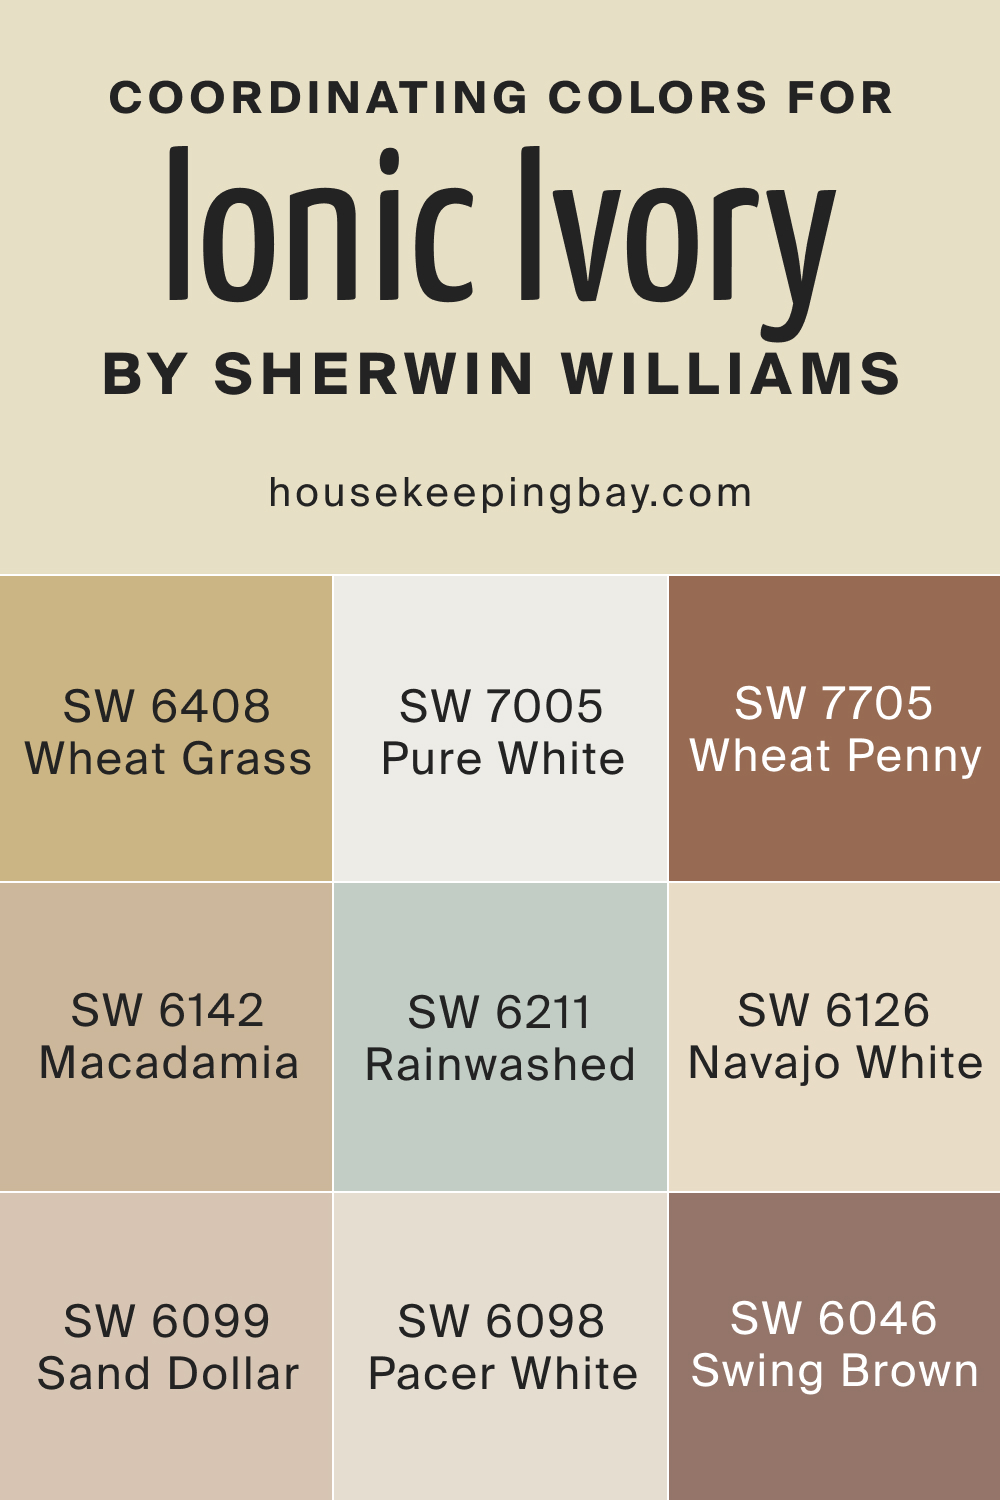 Coordinating Colors for SW 6406 Ionic Ivory by Sherwin Williams